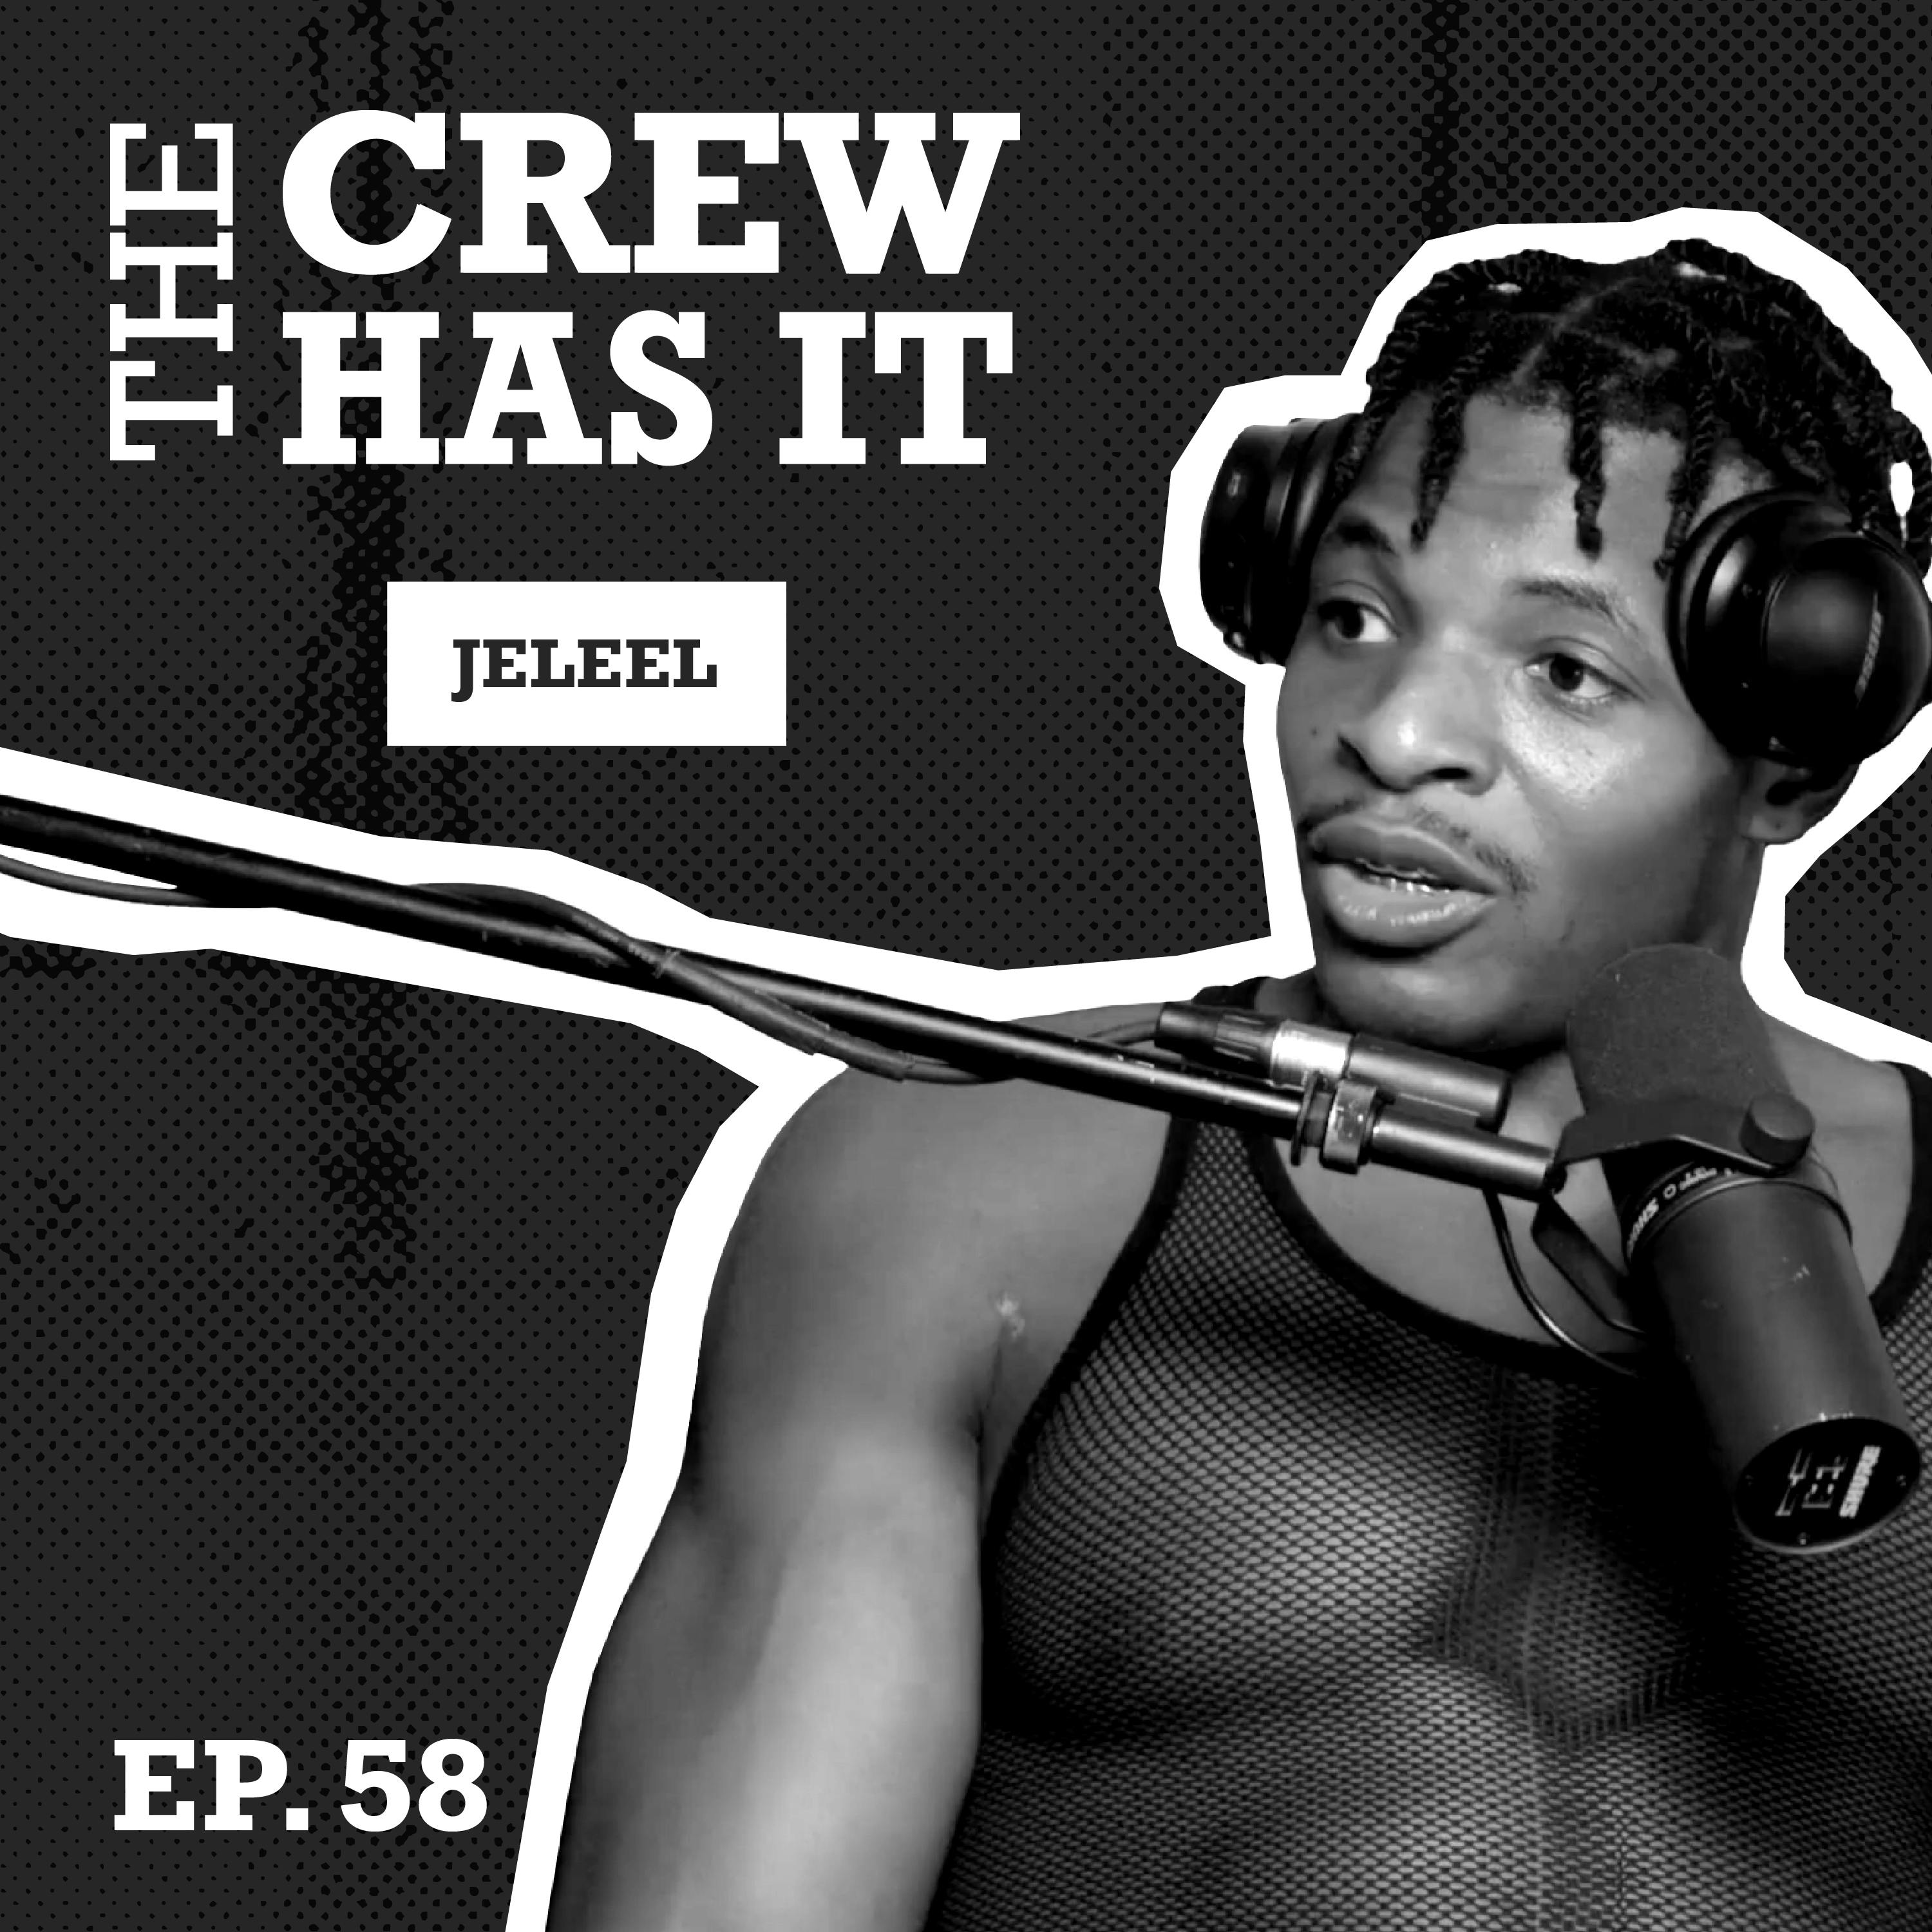 JELEEL talks music, going viral & developing a new sound | EP 58 | The Crew Has It